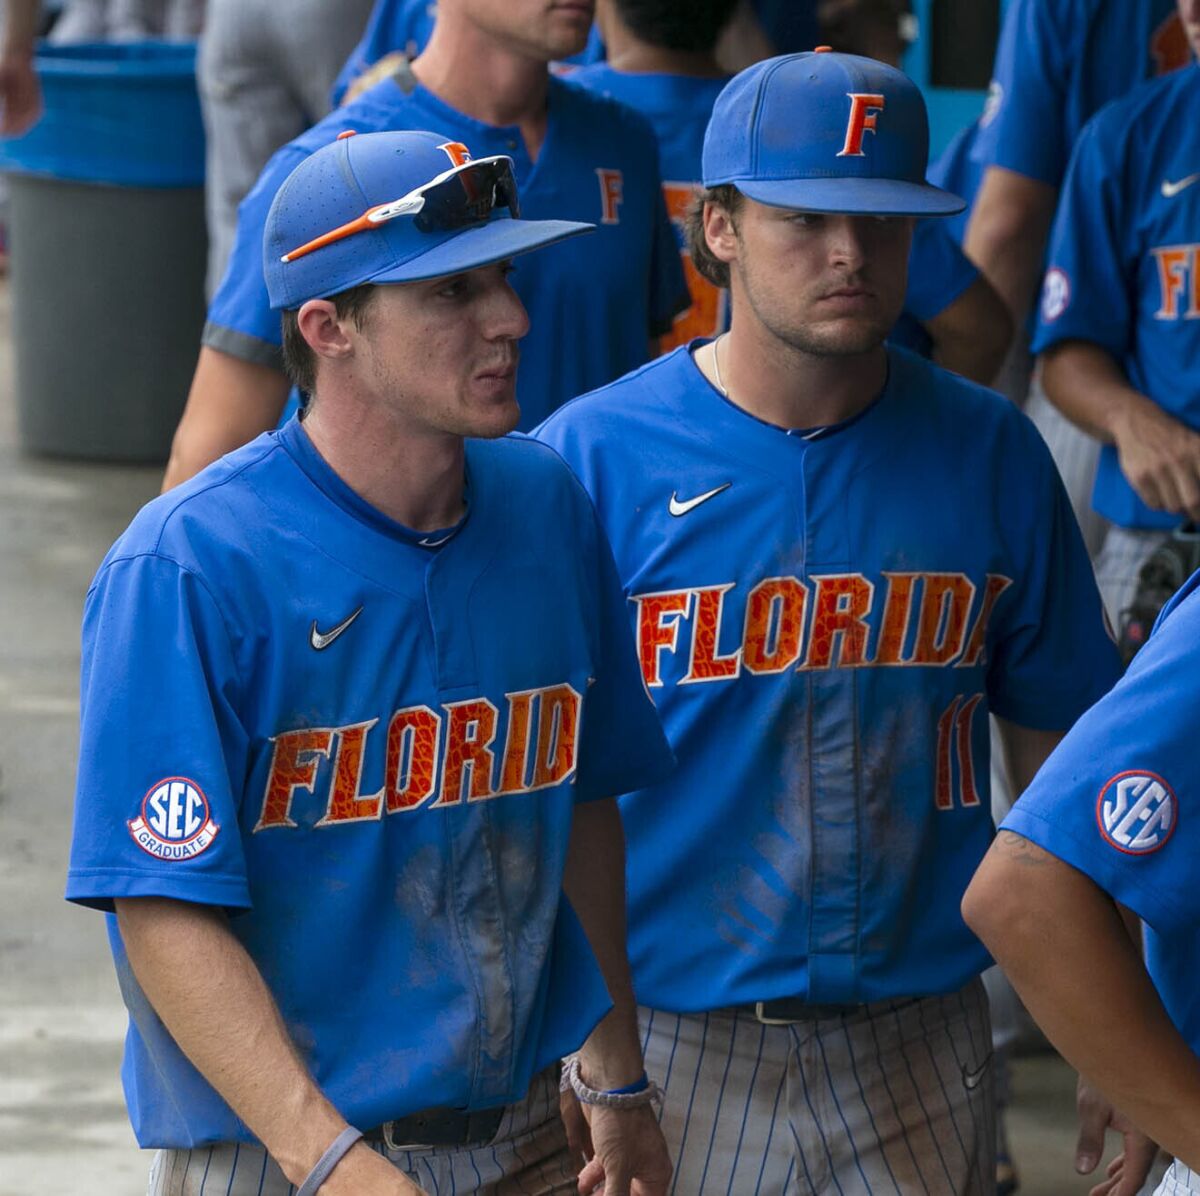 Florida's Jacob Young (1) and Nathan Hickey (11) react following to the Gators 19-1 loss to South Alabama in an NCAA regional tournament college baseball game against South Alabama at Florida Ballpark, Saturday, June 5, 2021, in Gainesville, Fla. (Cyndi Chambers/Ocala Star-Banner via AP)